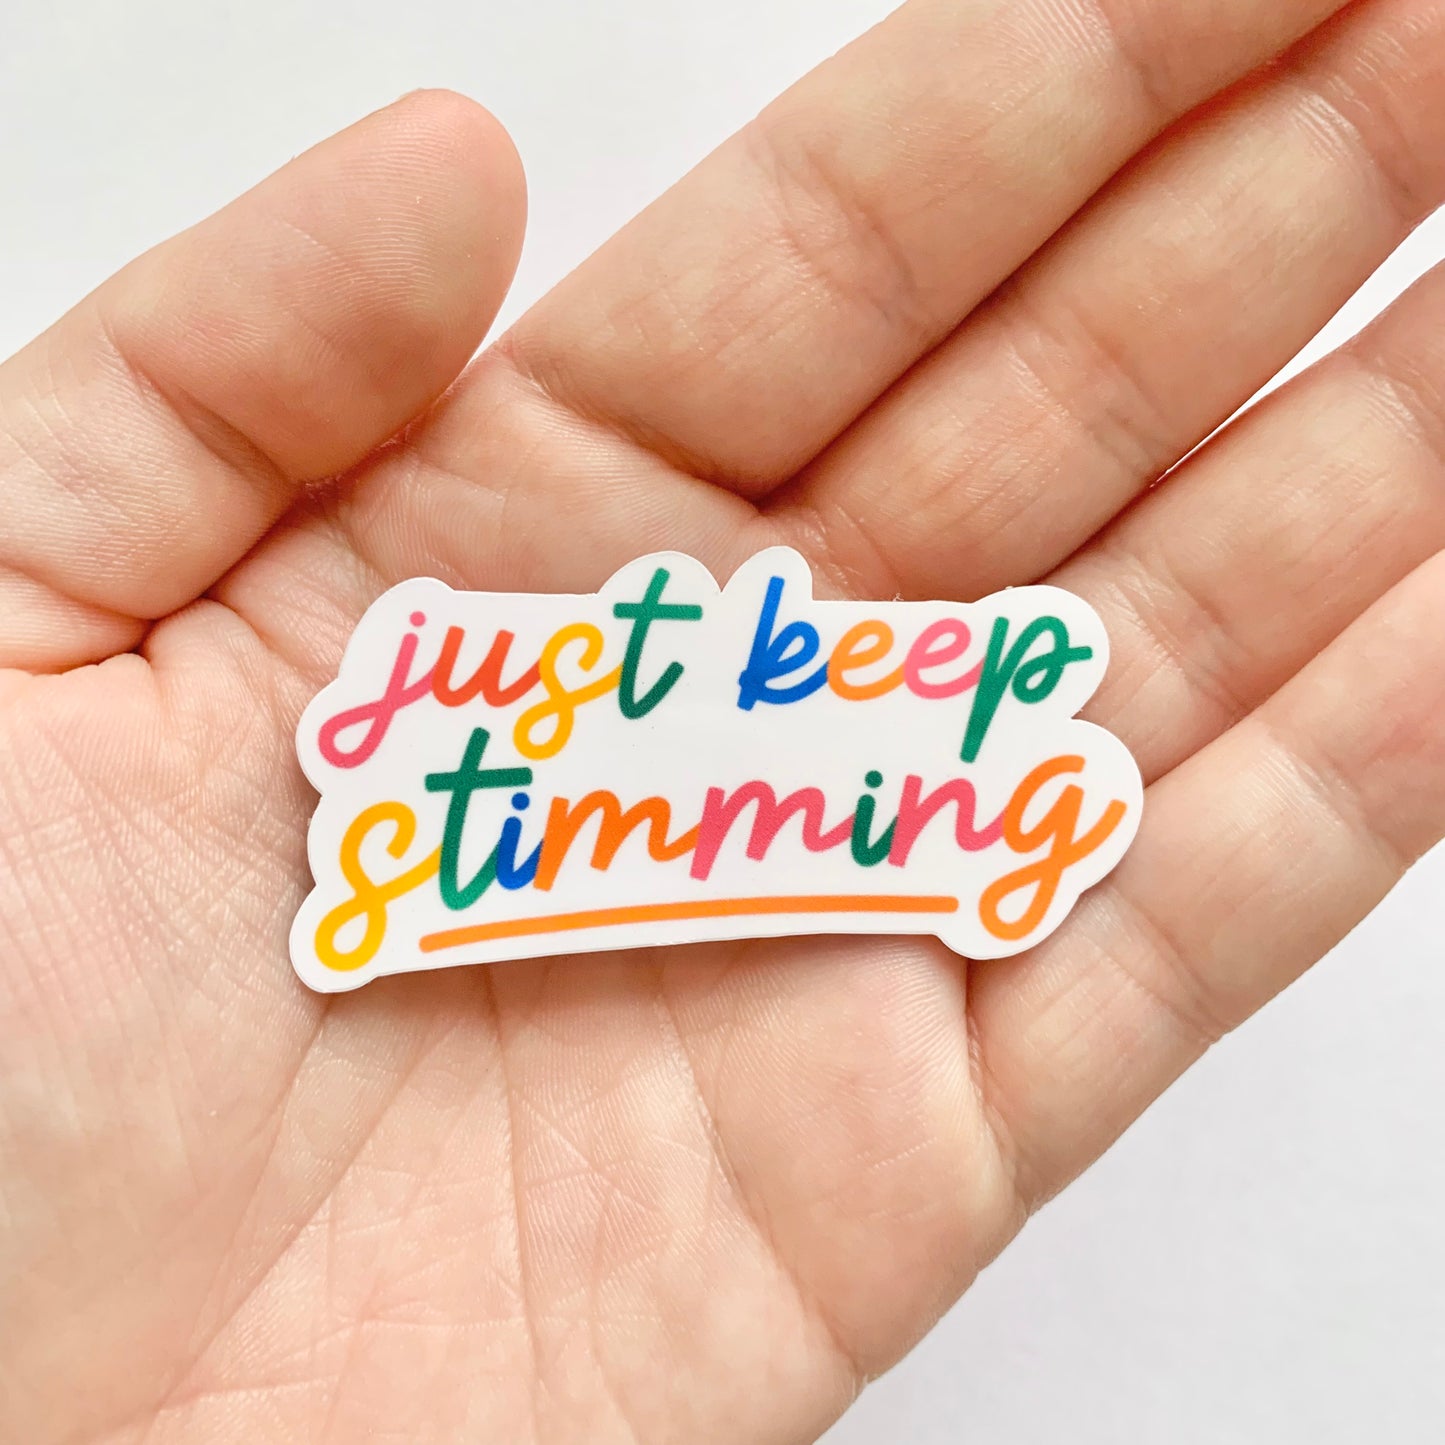 Just Keep Stimming Sticker - Autism Awareness and Acceptance